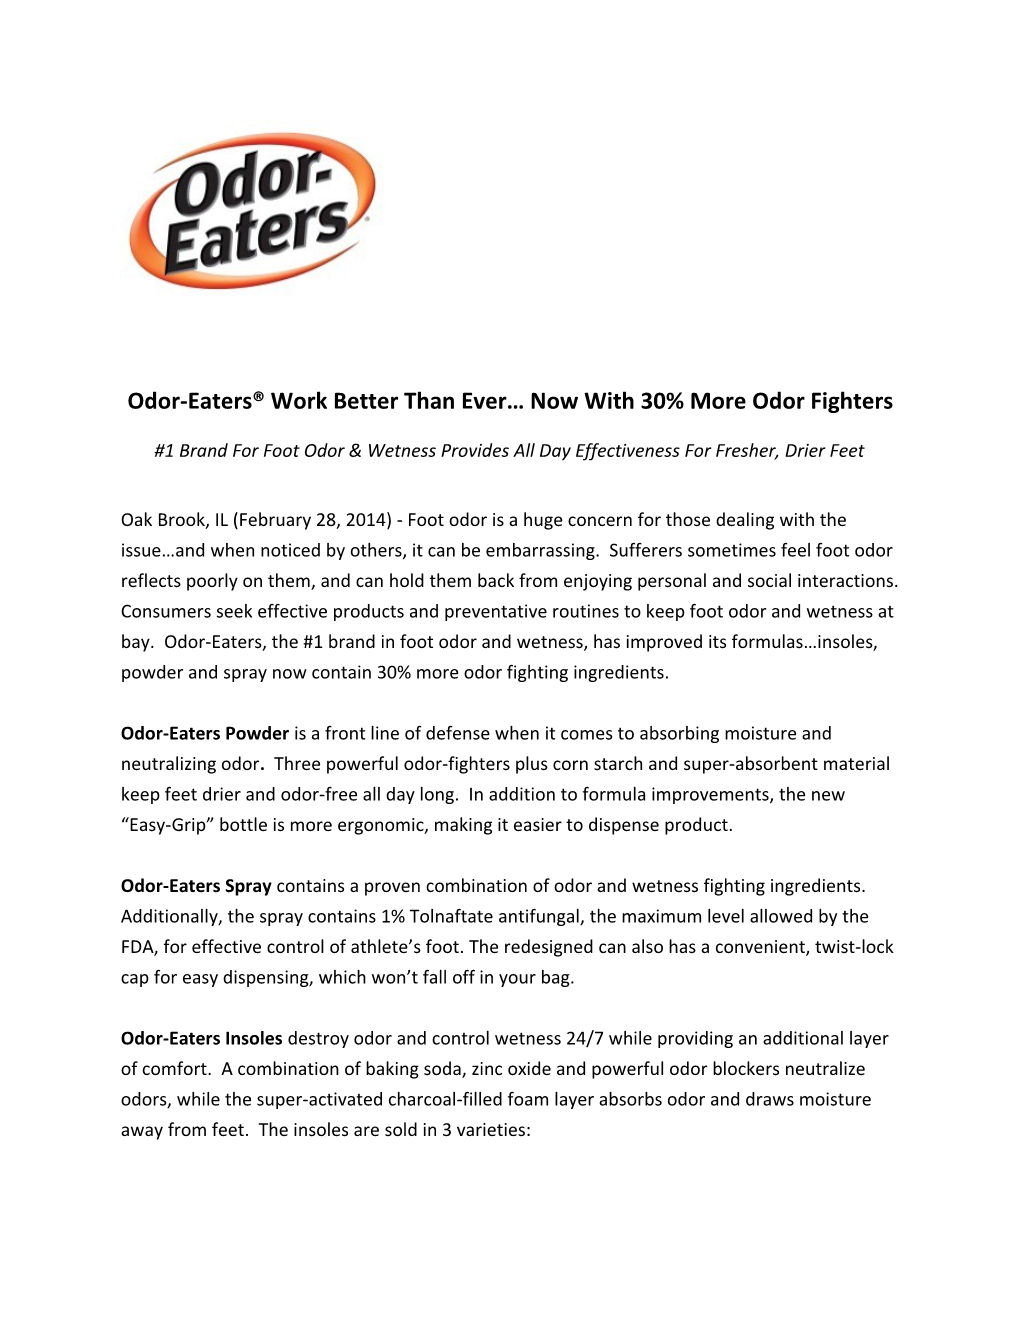 Odor-Eaters Work Better Than Ever Now with 30% More Odor Fighters